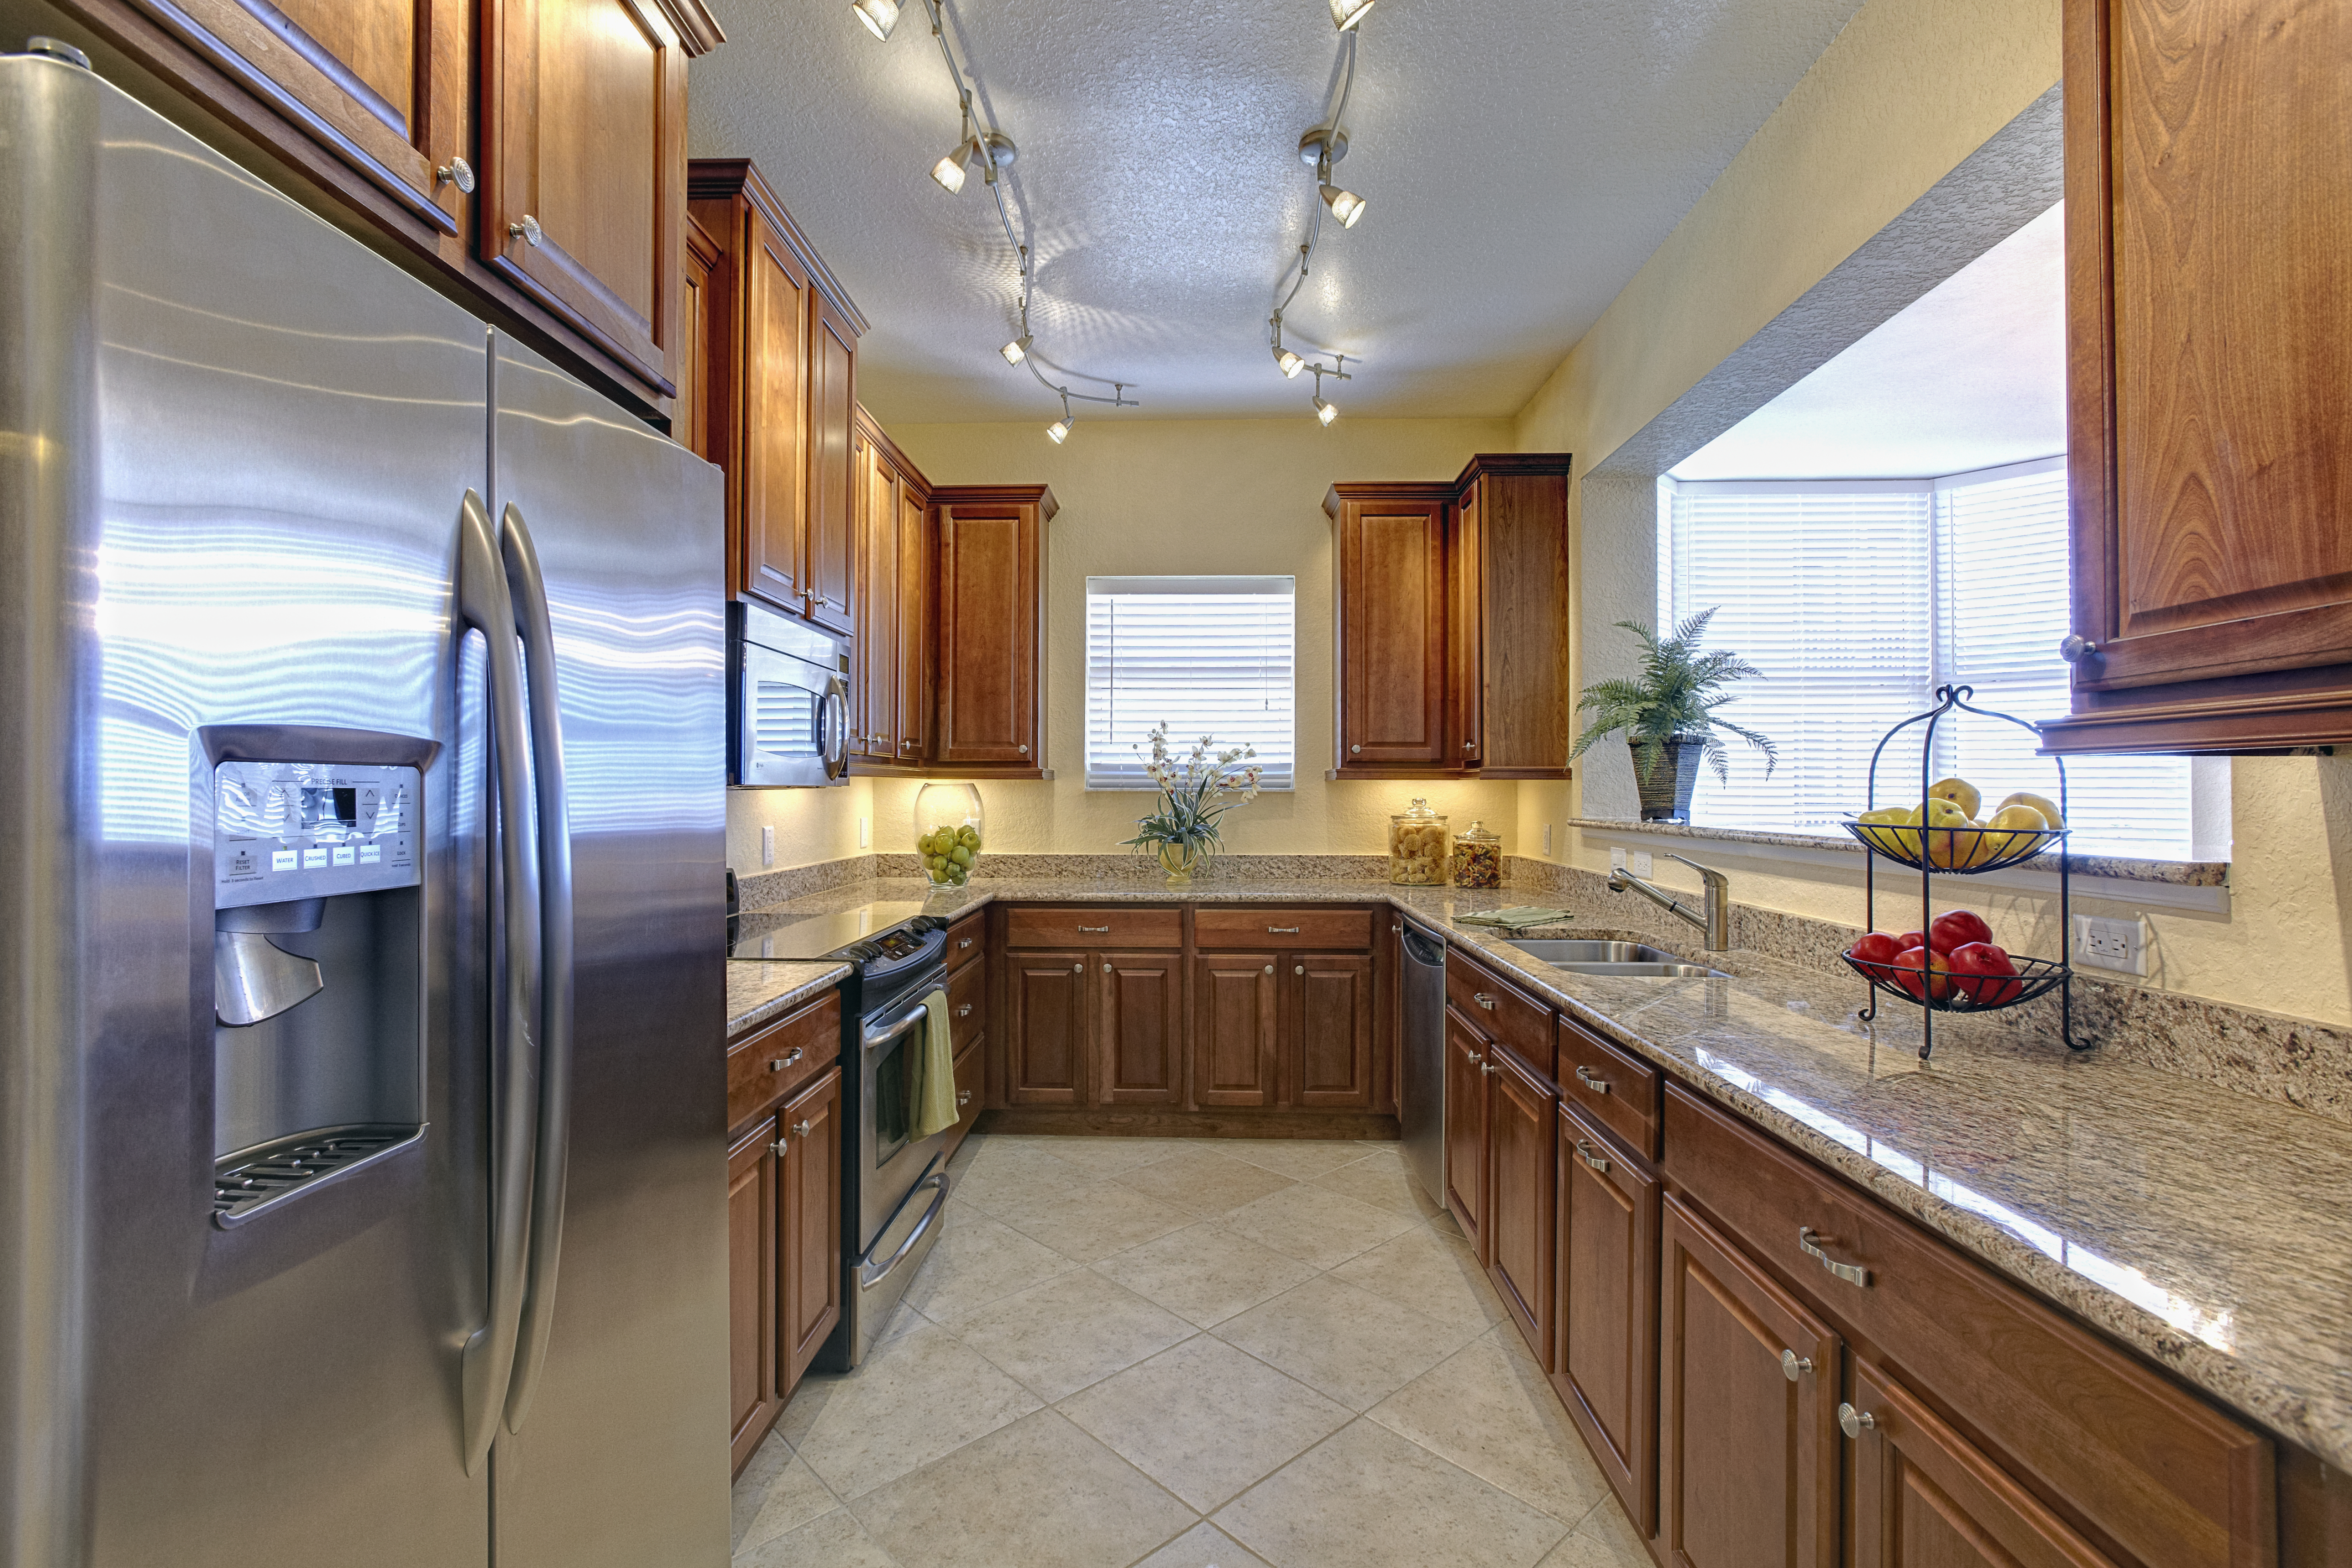 Kitchen Remodeling & Cabinet Refacing in Arizona